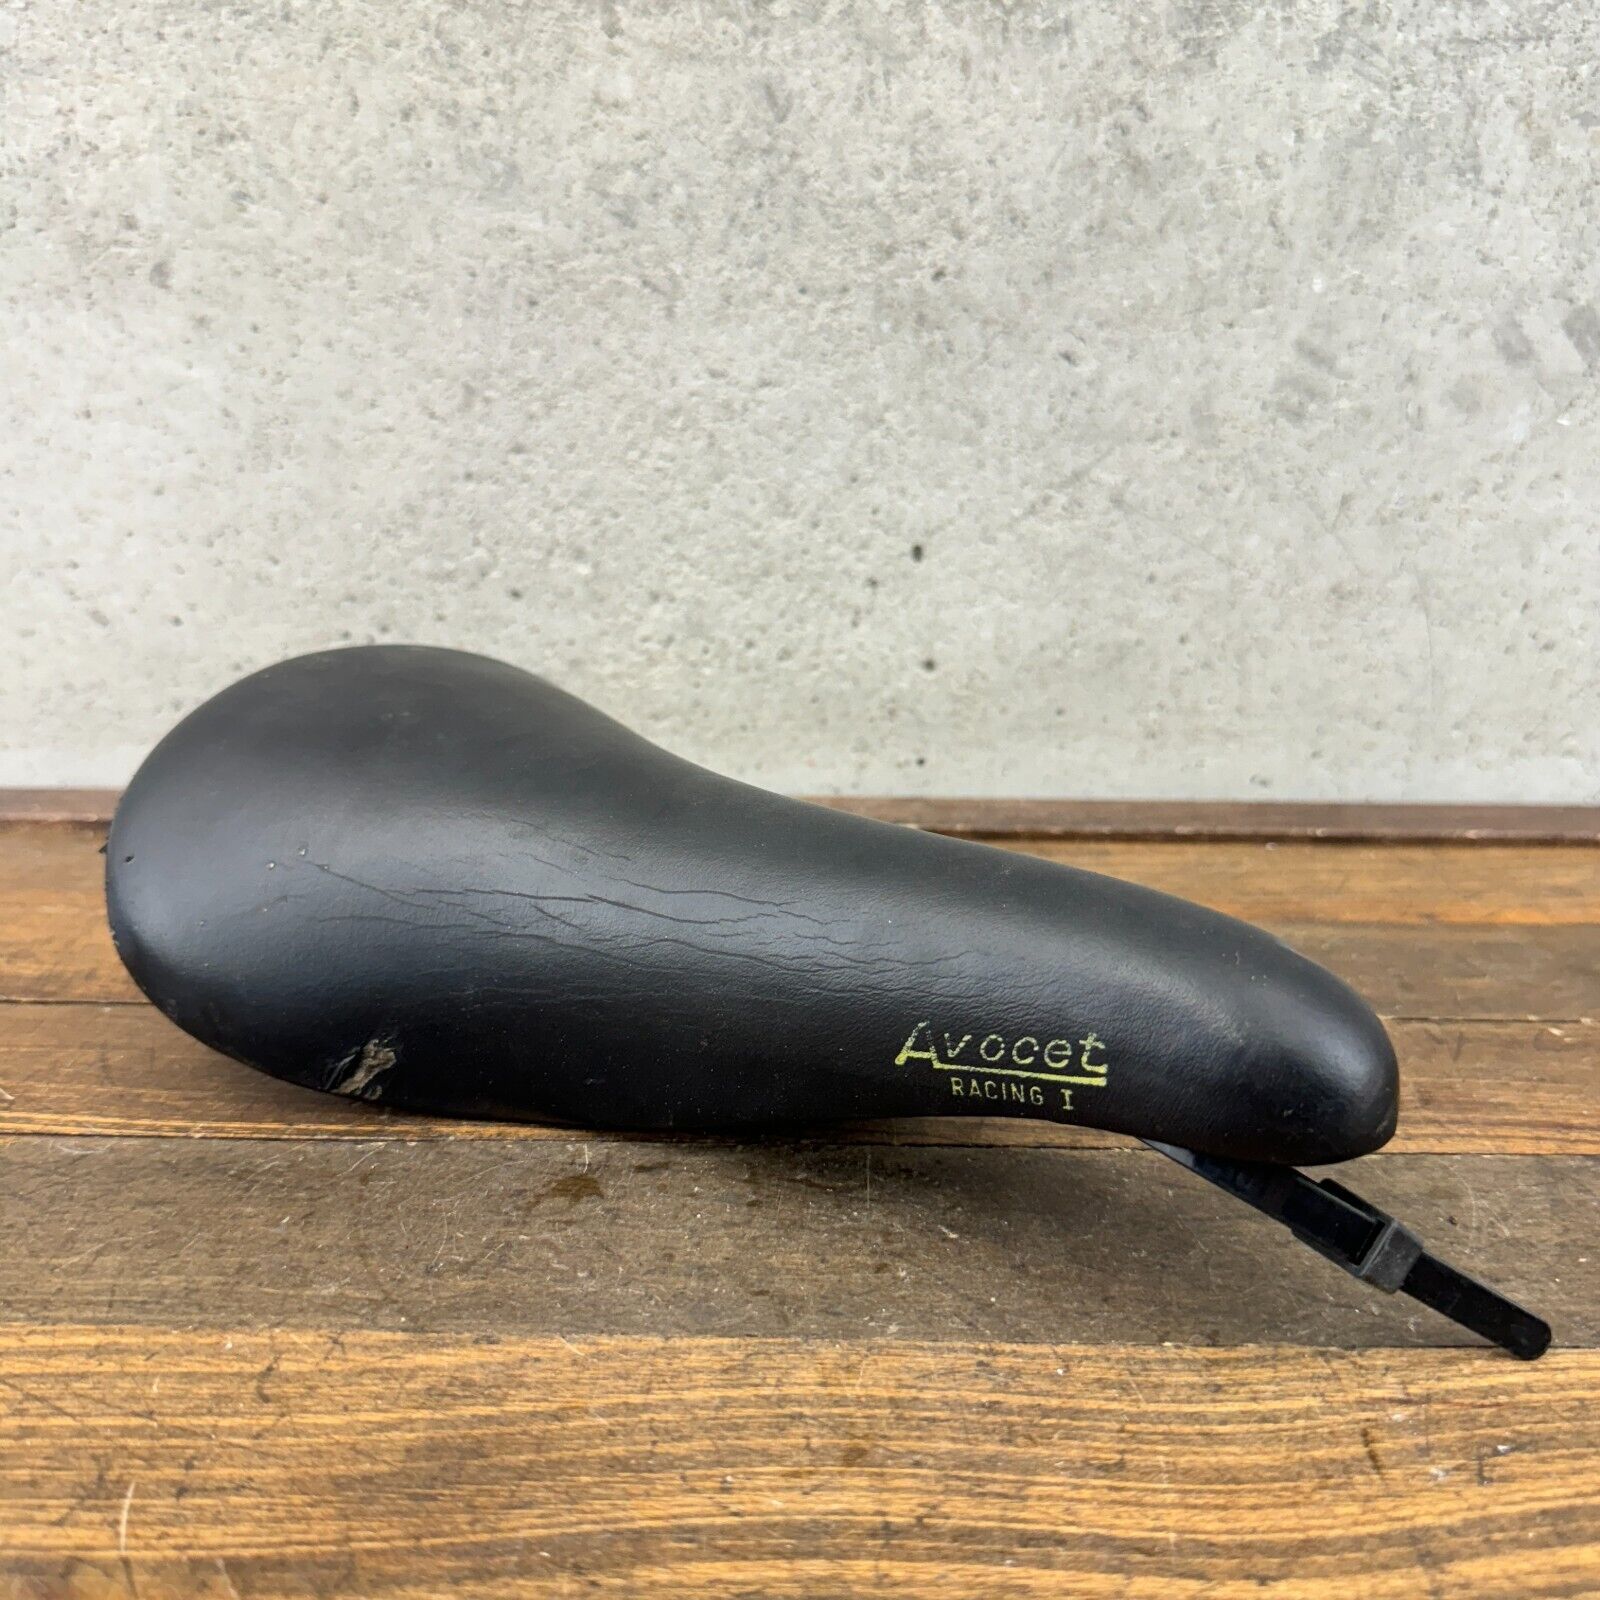 Vintage Avocet Racing I Seat Race Saddle Road Racing 1 70s 80s Black 1981 A4